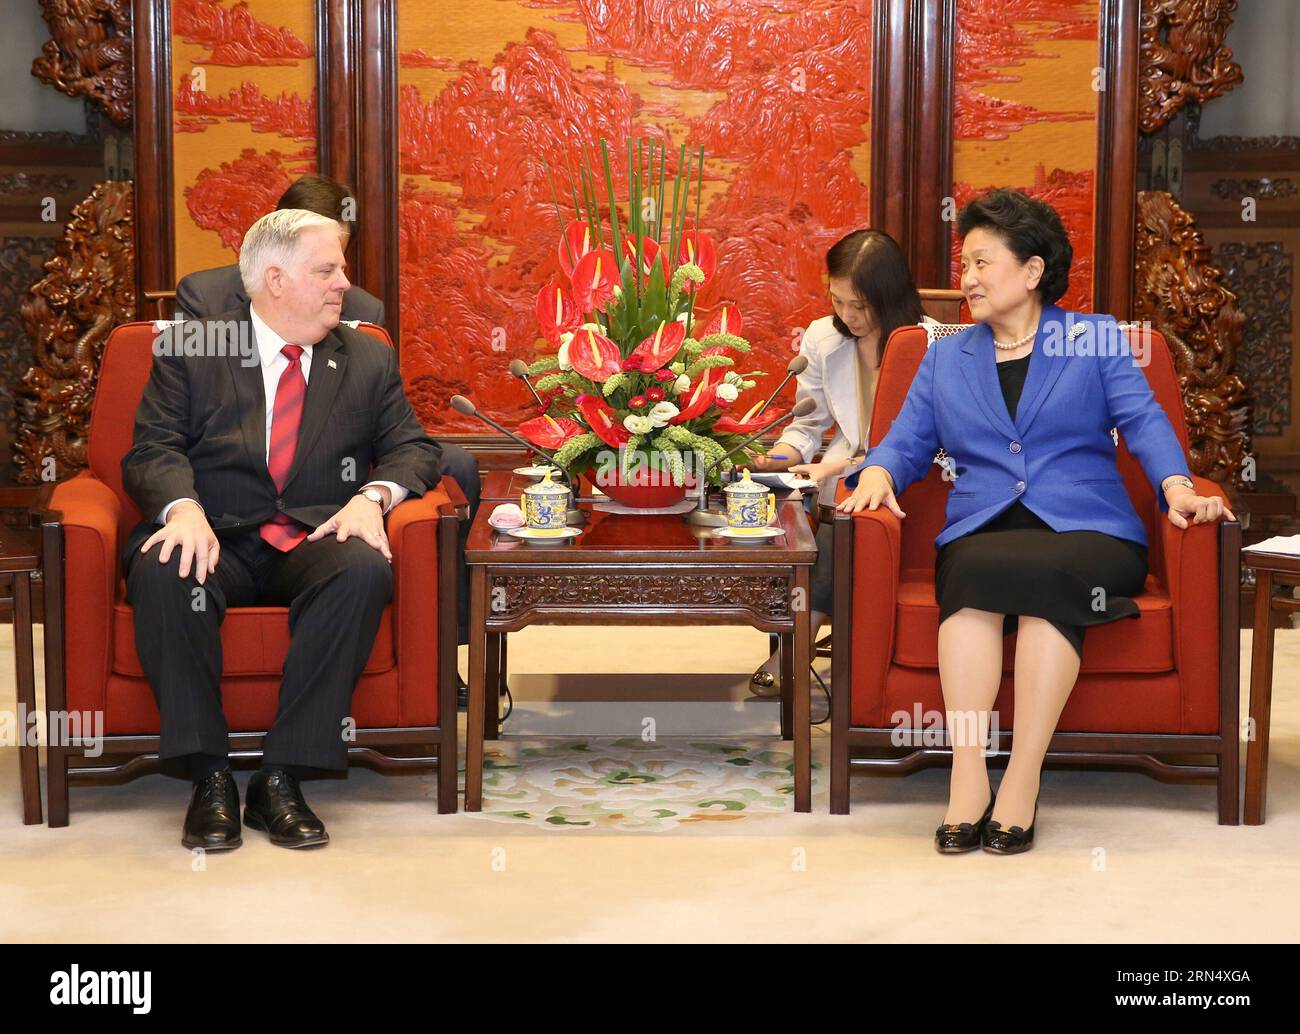 (150602) -- BEIJING, June 2, 2015 -- Chinese Vice Premier Liu Yandong (R) meets with Larry Hogan, governor of the U.S. state of Maryland, in Beijing, capital of China, June 1, 2015. ) (zkr) CHINA-BEIJING-LIU YANDONG-U.S.-LARRY HOGAN-MEETING(CN) MaxZhancheng PUBLICATIONxNOTxINxCHN   150602 Beijing June 2 2015 Chinese Vice Premier Liu Yandong r Meets With Larry Hogan Governor of The U S State of Maryland in Beijing Capital of China June 1 2015 CCR China Beijing Liu Yandong U S Larry Hogan Meeting CN MaxZhancheng PUBLICATIONxNOTxINxCHN Stock Photo